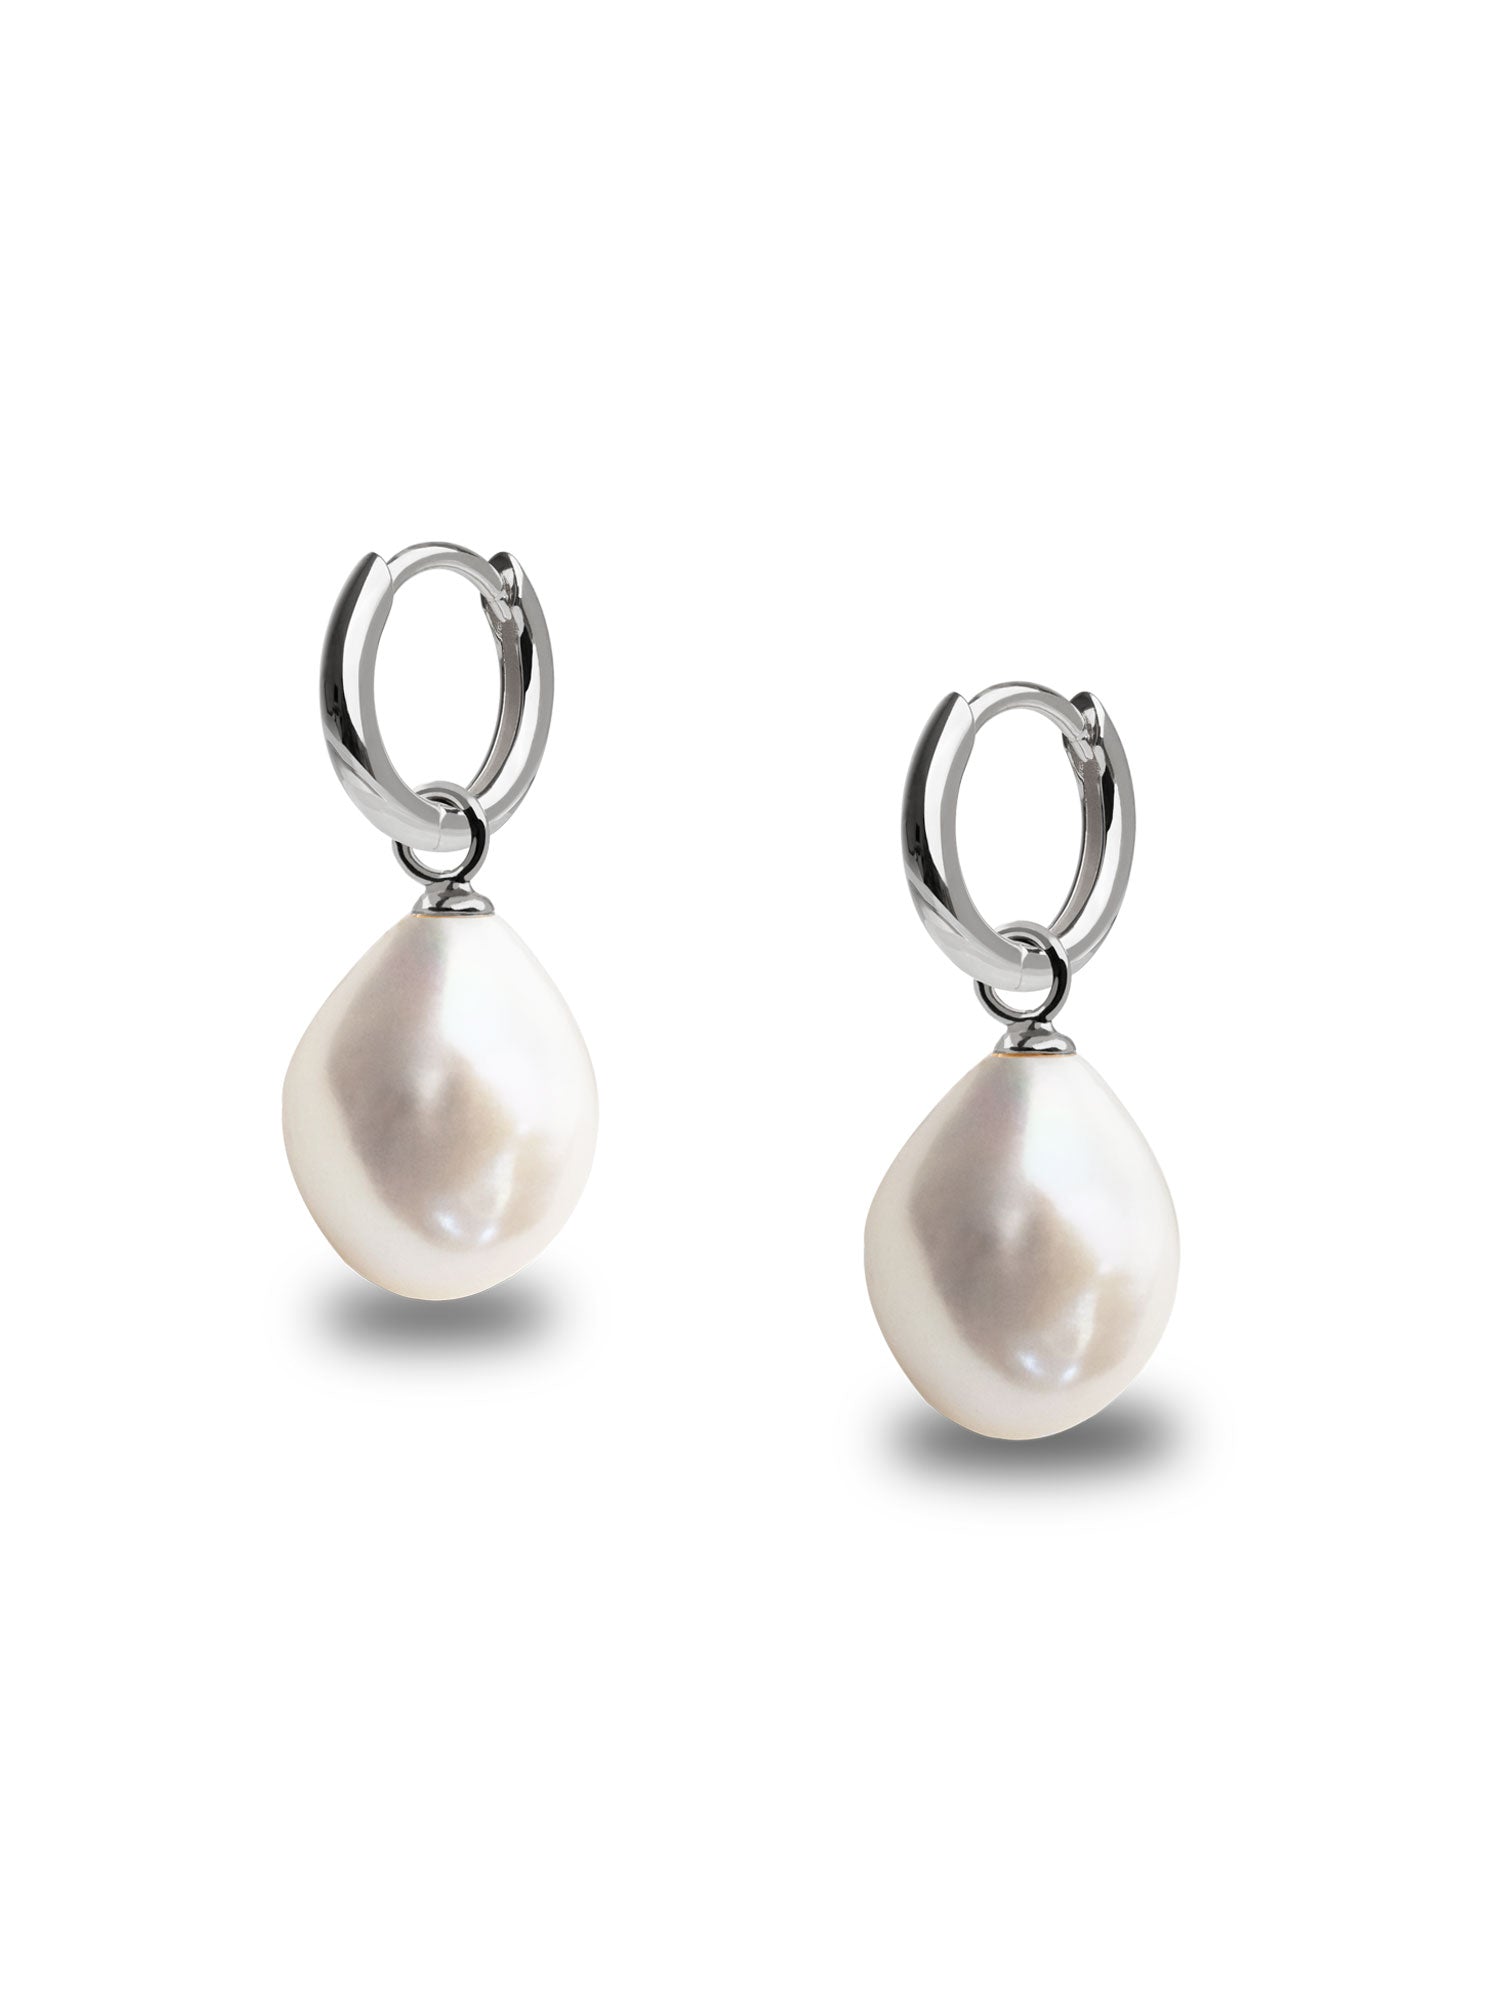 Sterling Silver Hoop Earrings with Baroque Pearl 12 and 16 mm